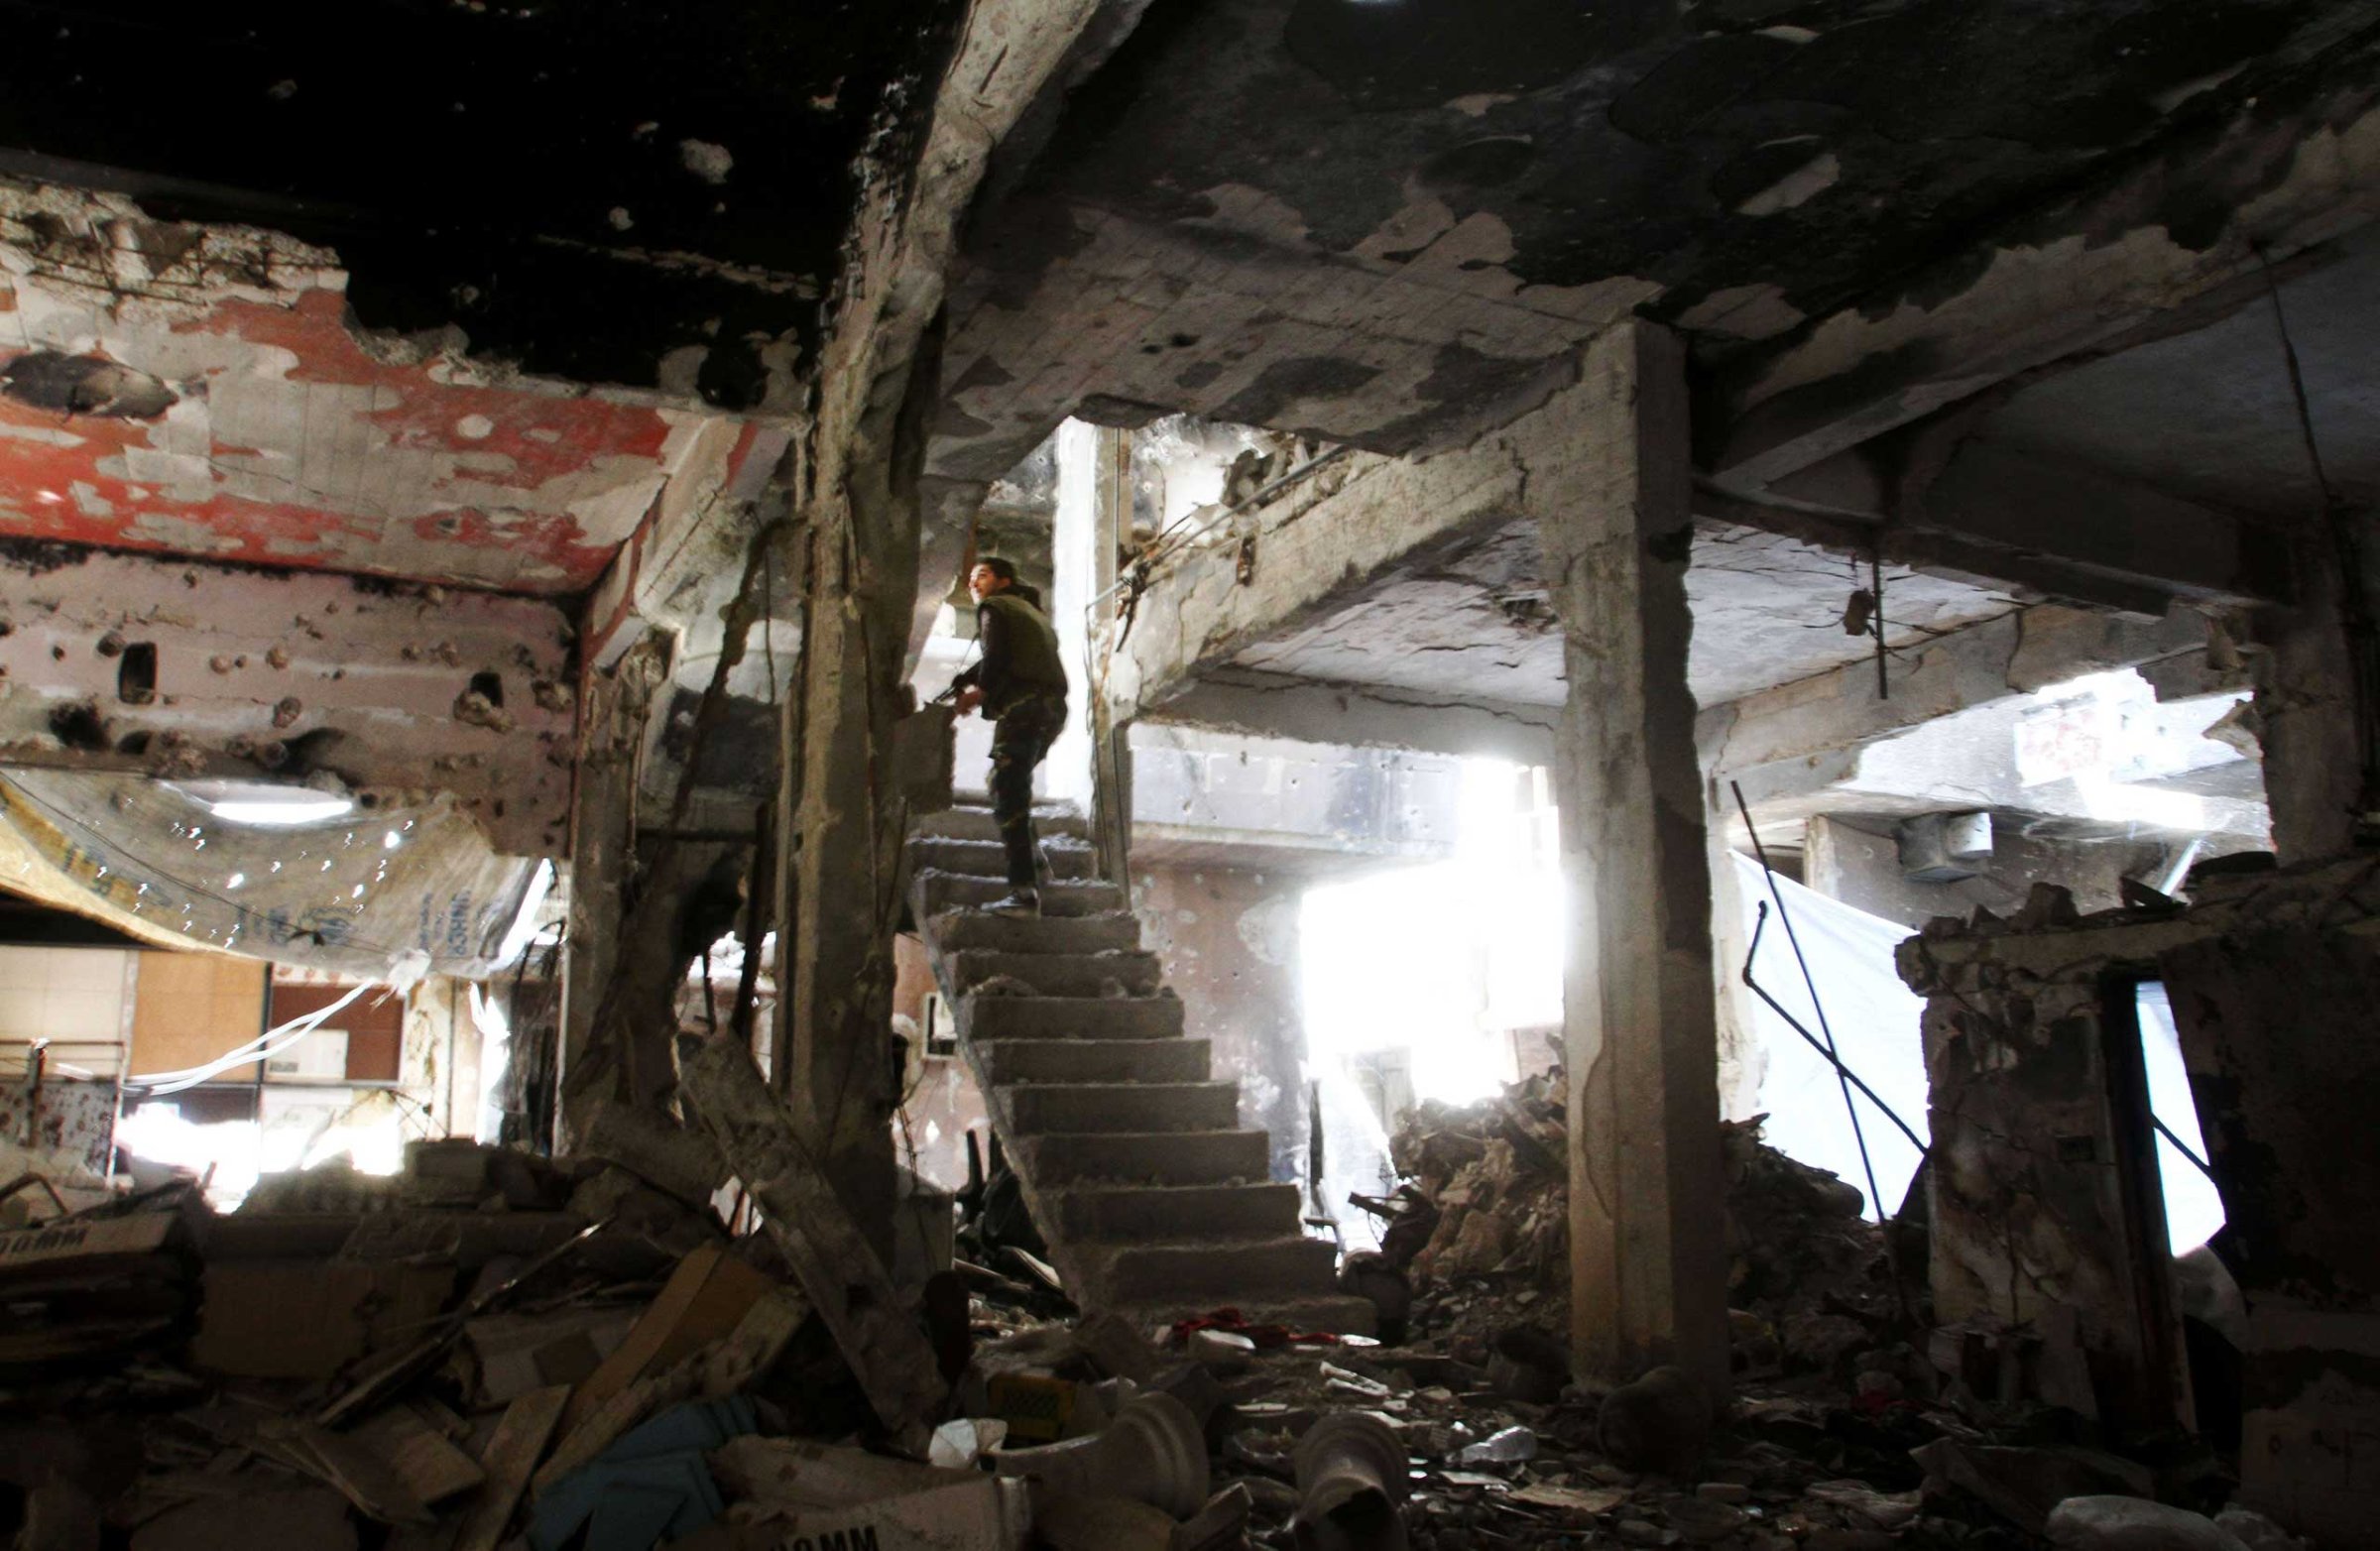 A man stands on a staircase inside a demolished building in the Yarmuk Palestinian refugee camp in the Syrian capital Damascus on April 6, 2015.